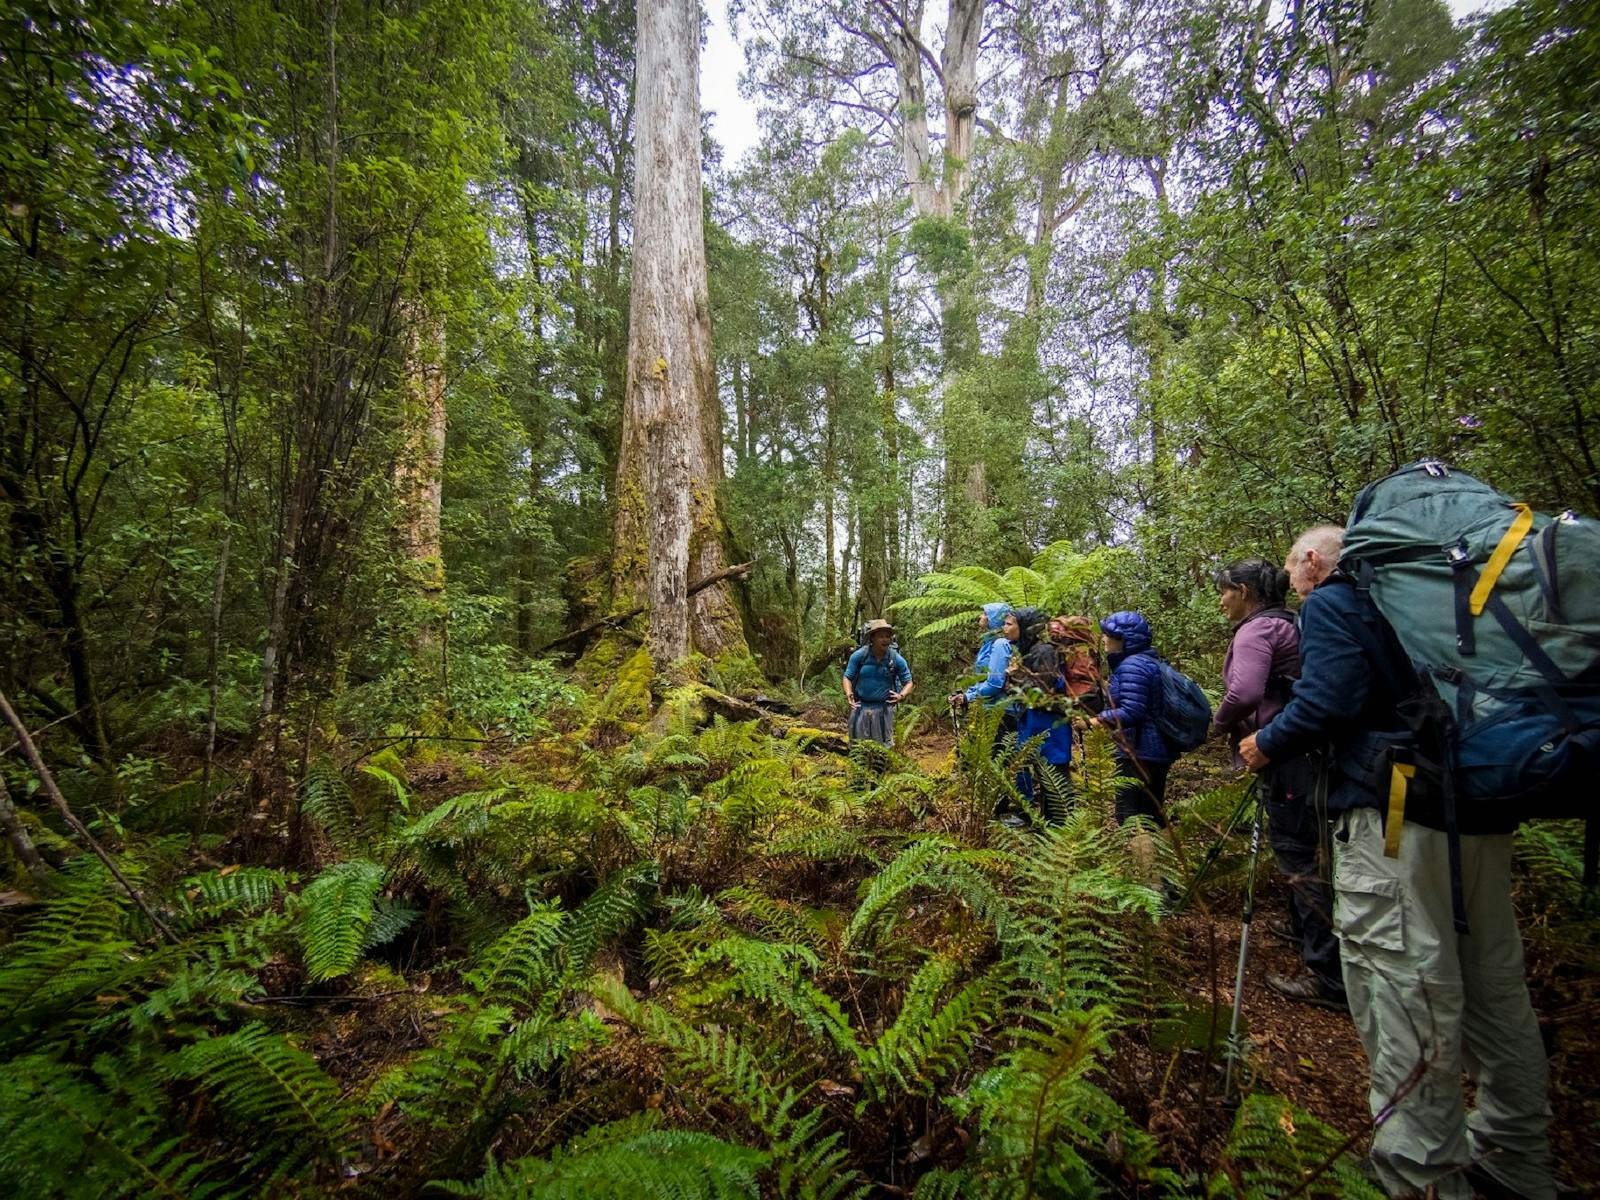 Learning about the takayna/Tarkine rainforest